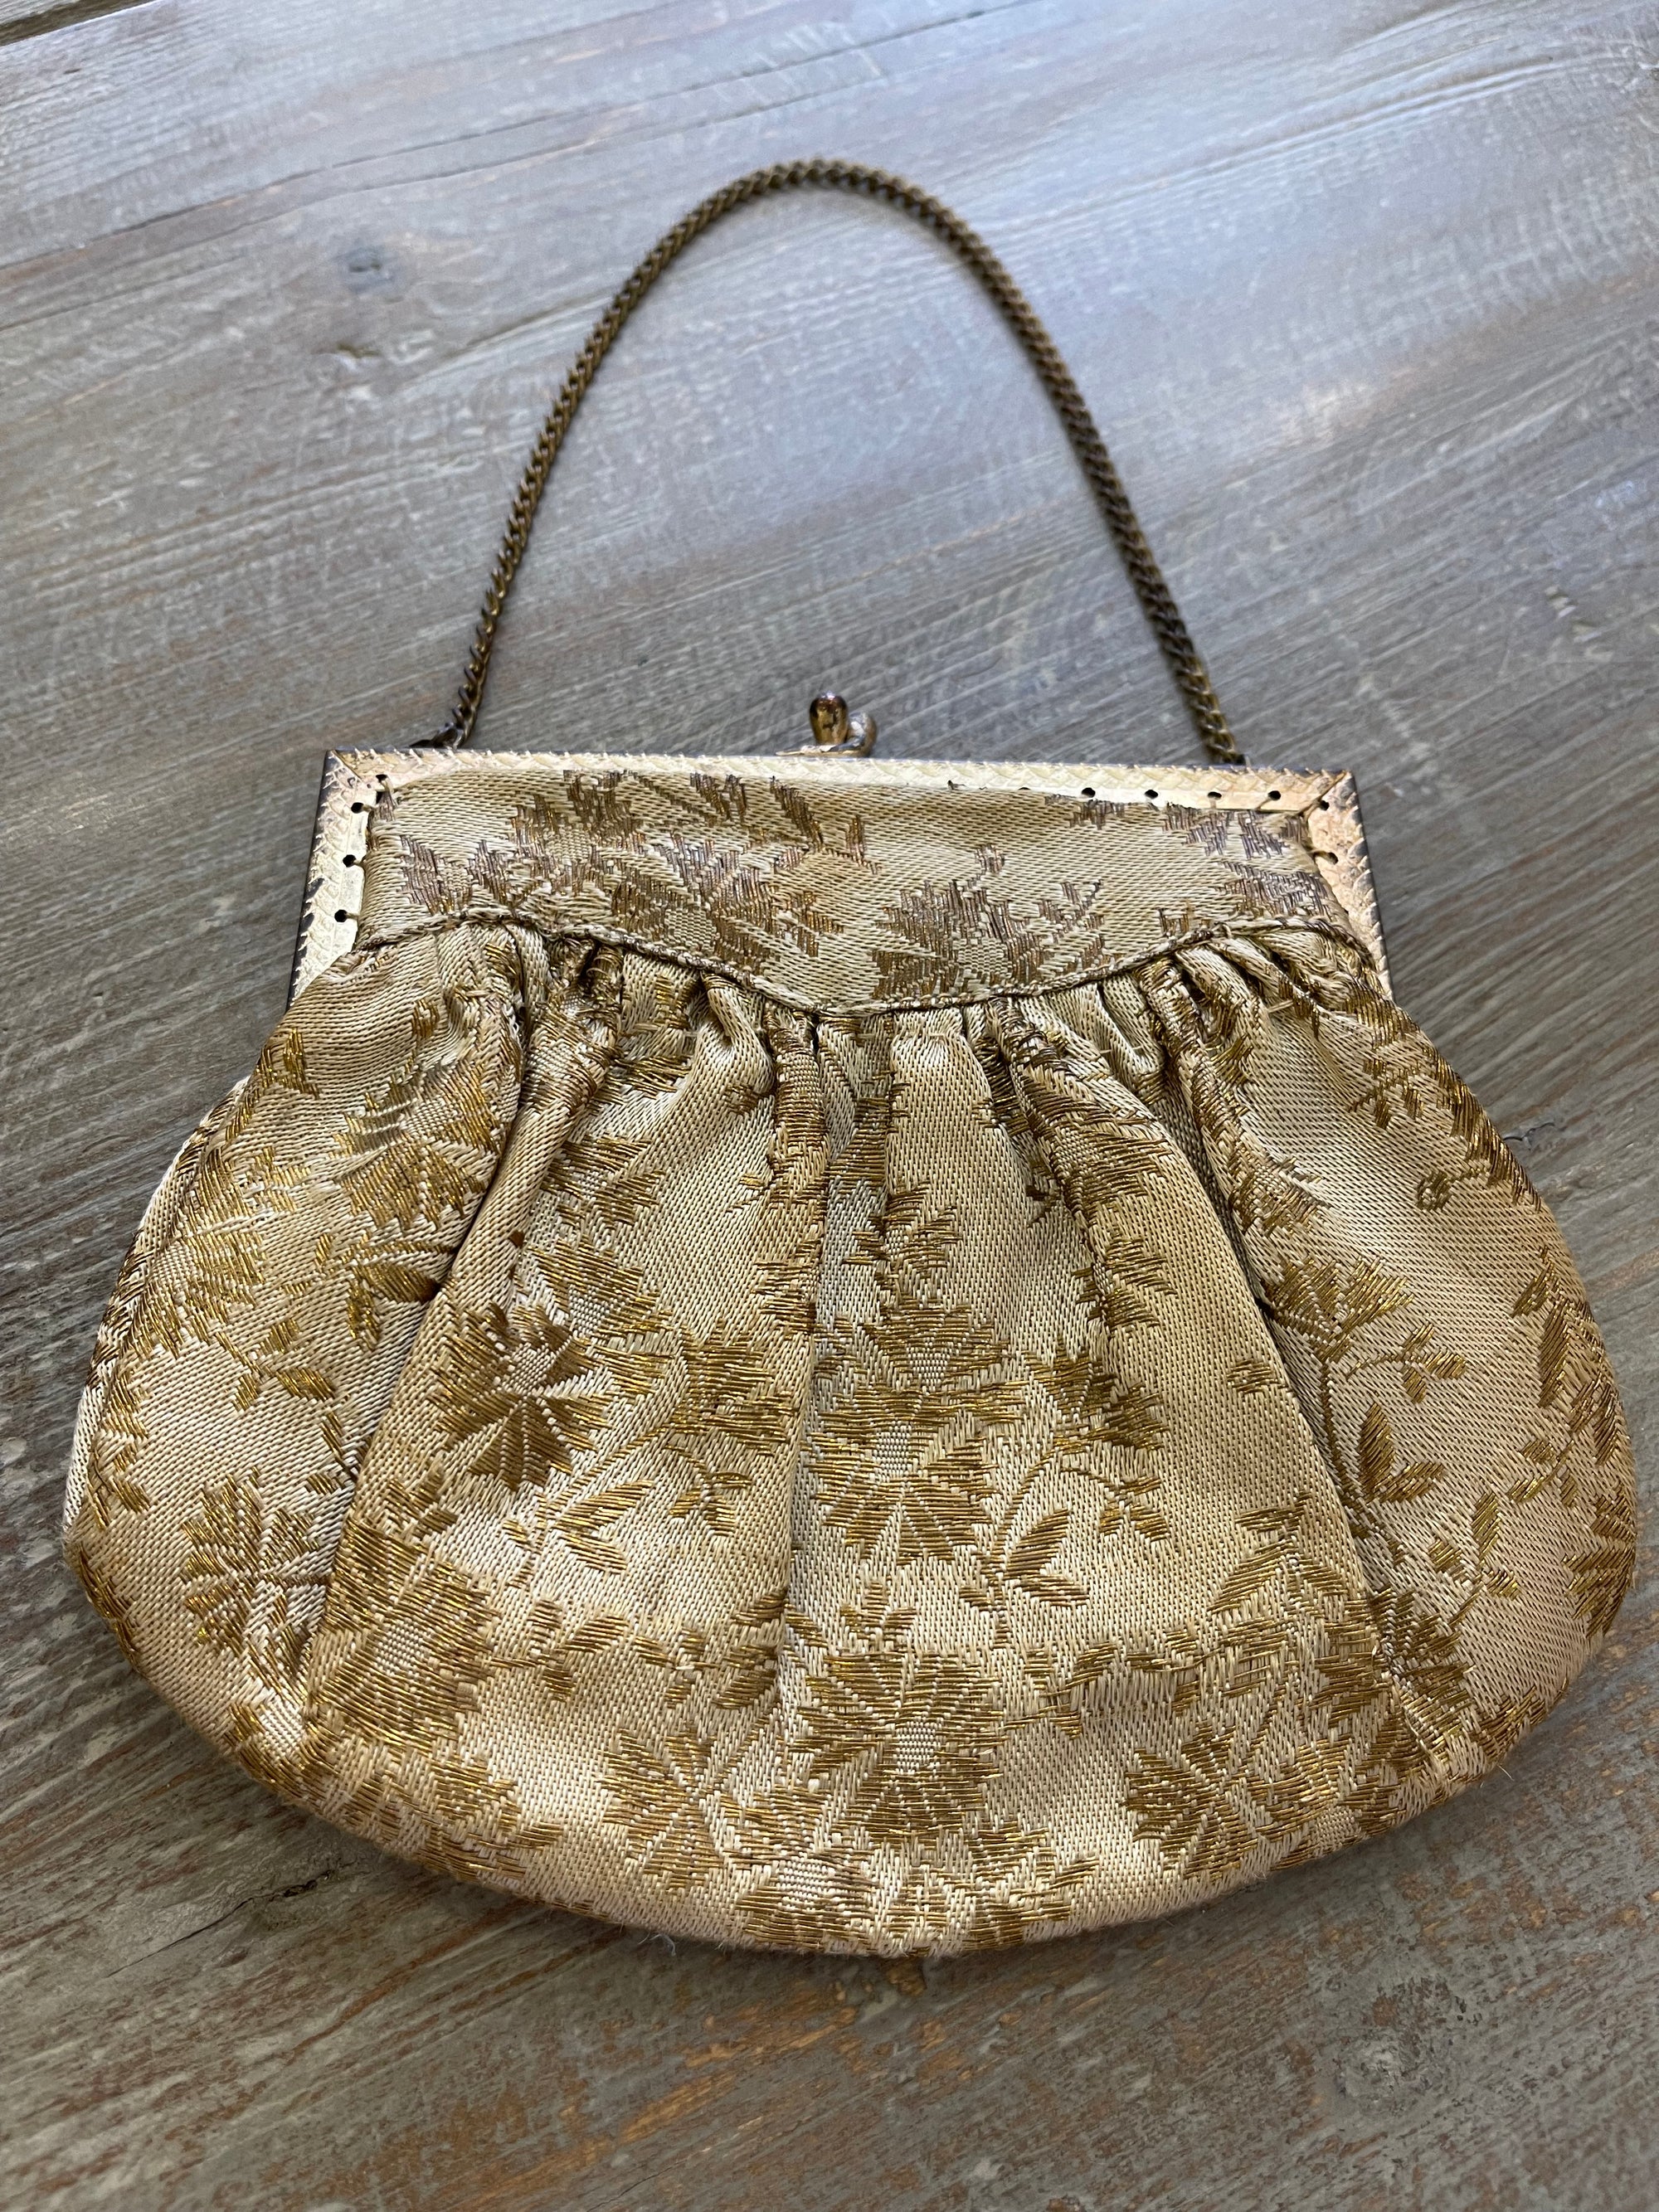 Antique French Purse